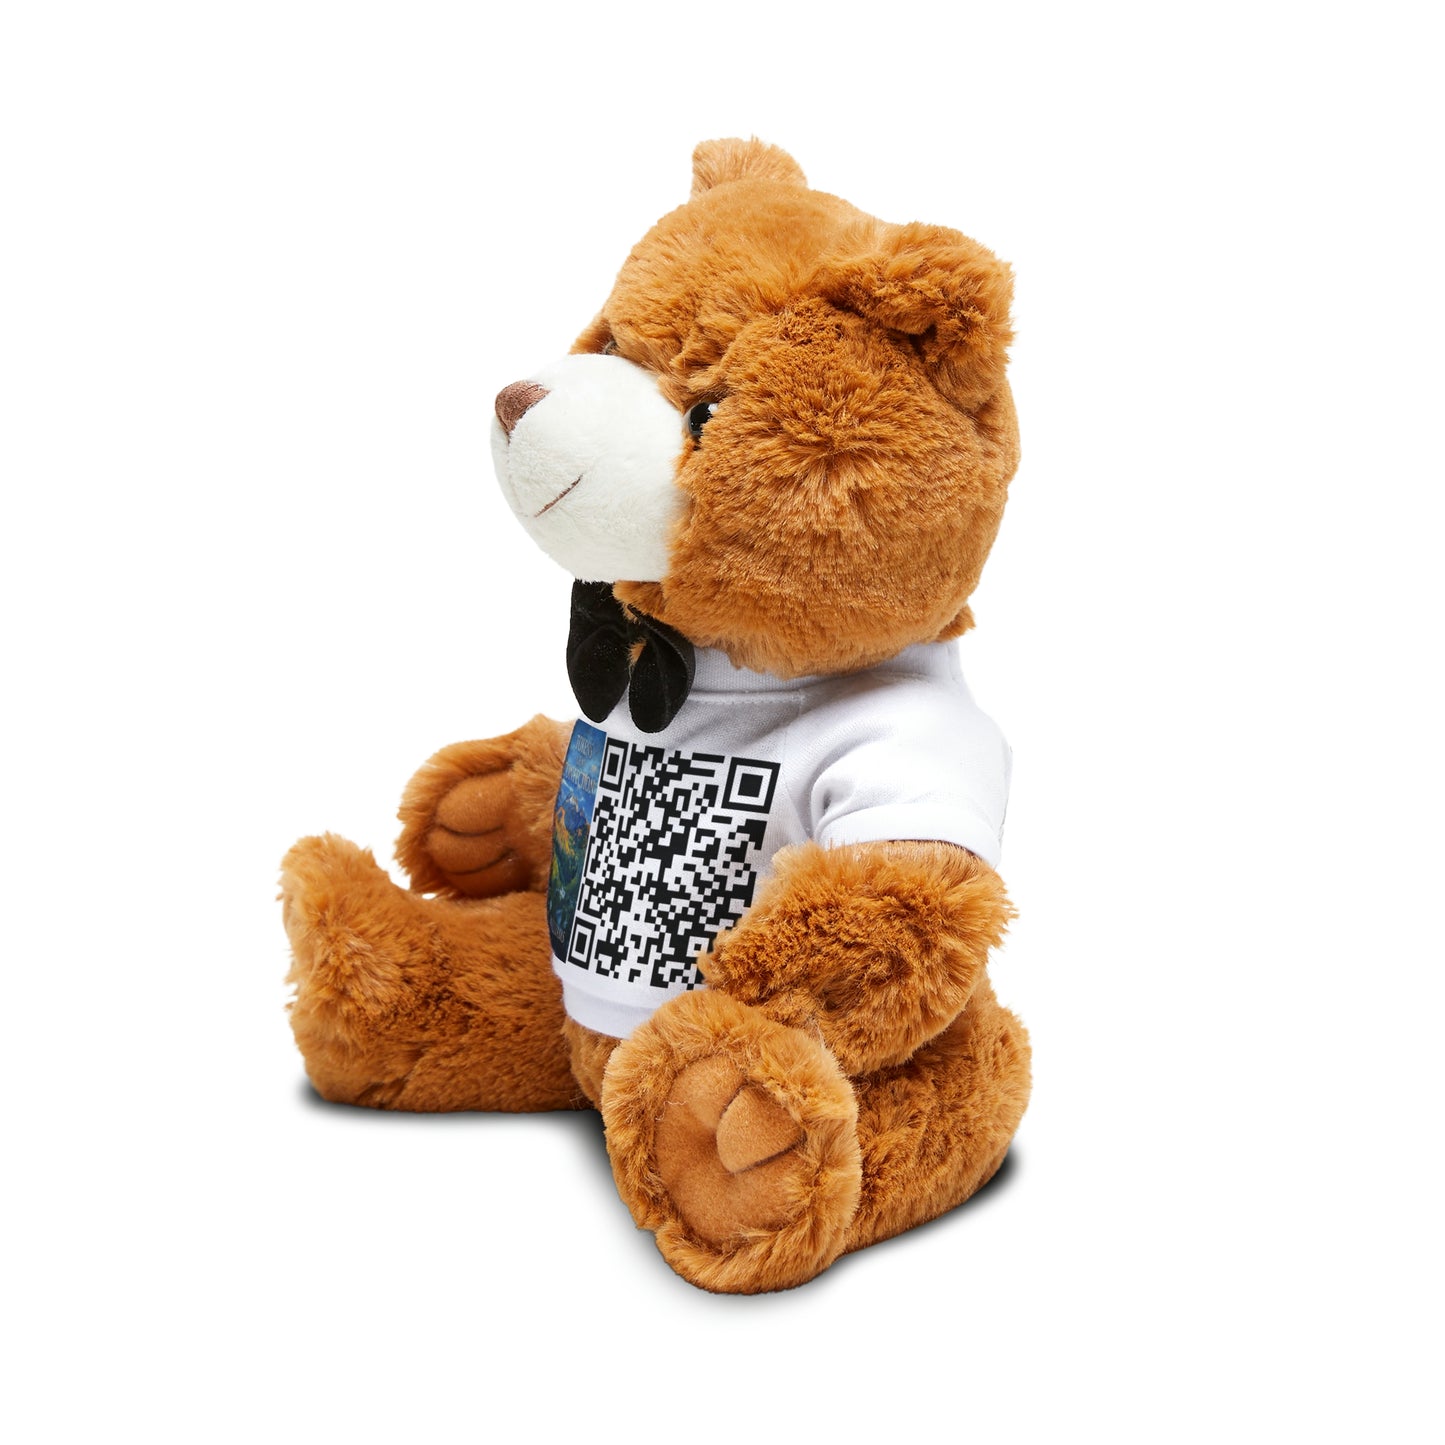 Tokens Of My Confection - Teddy Bear